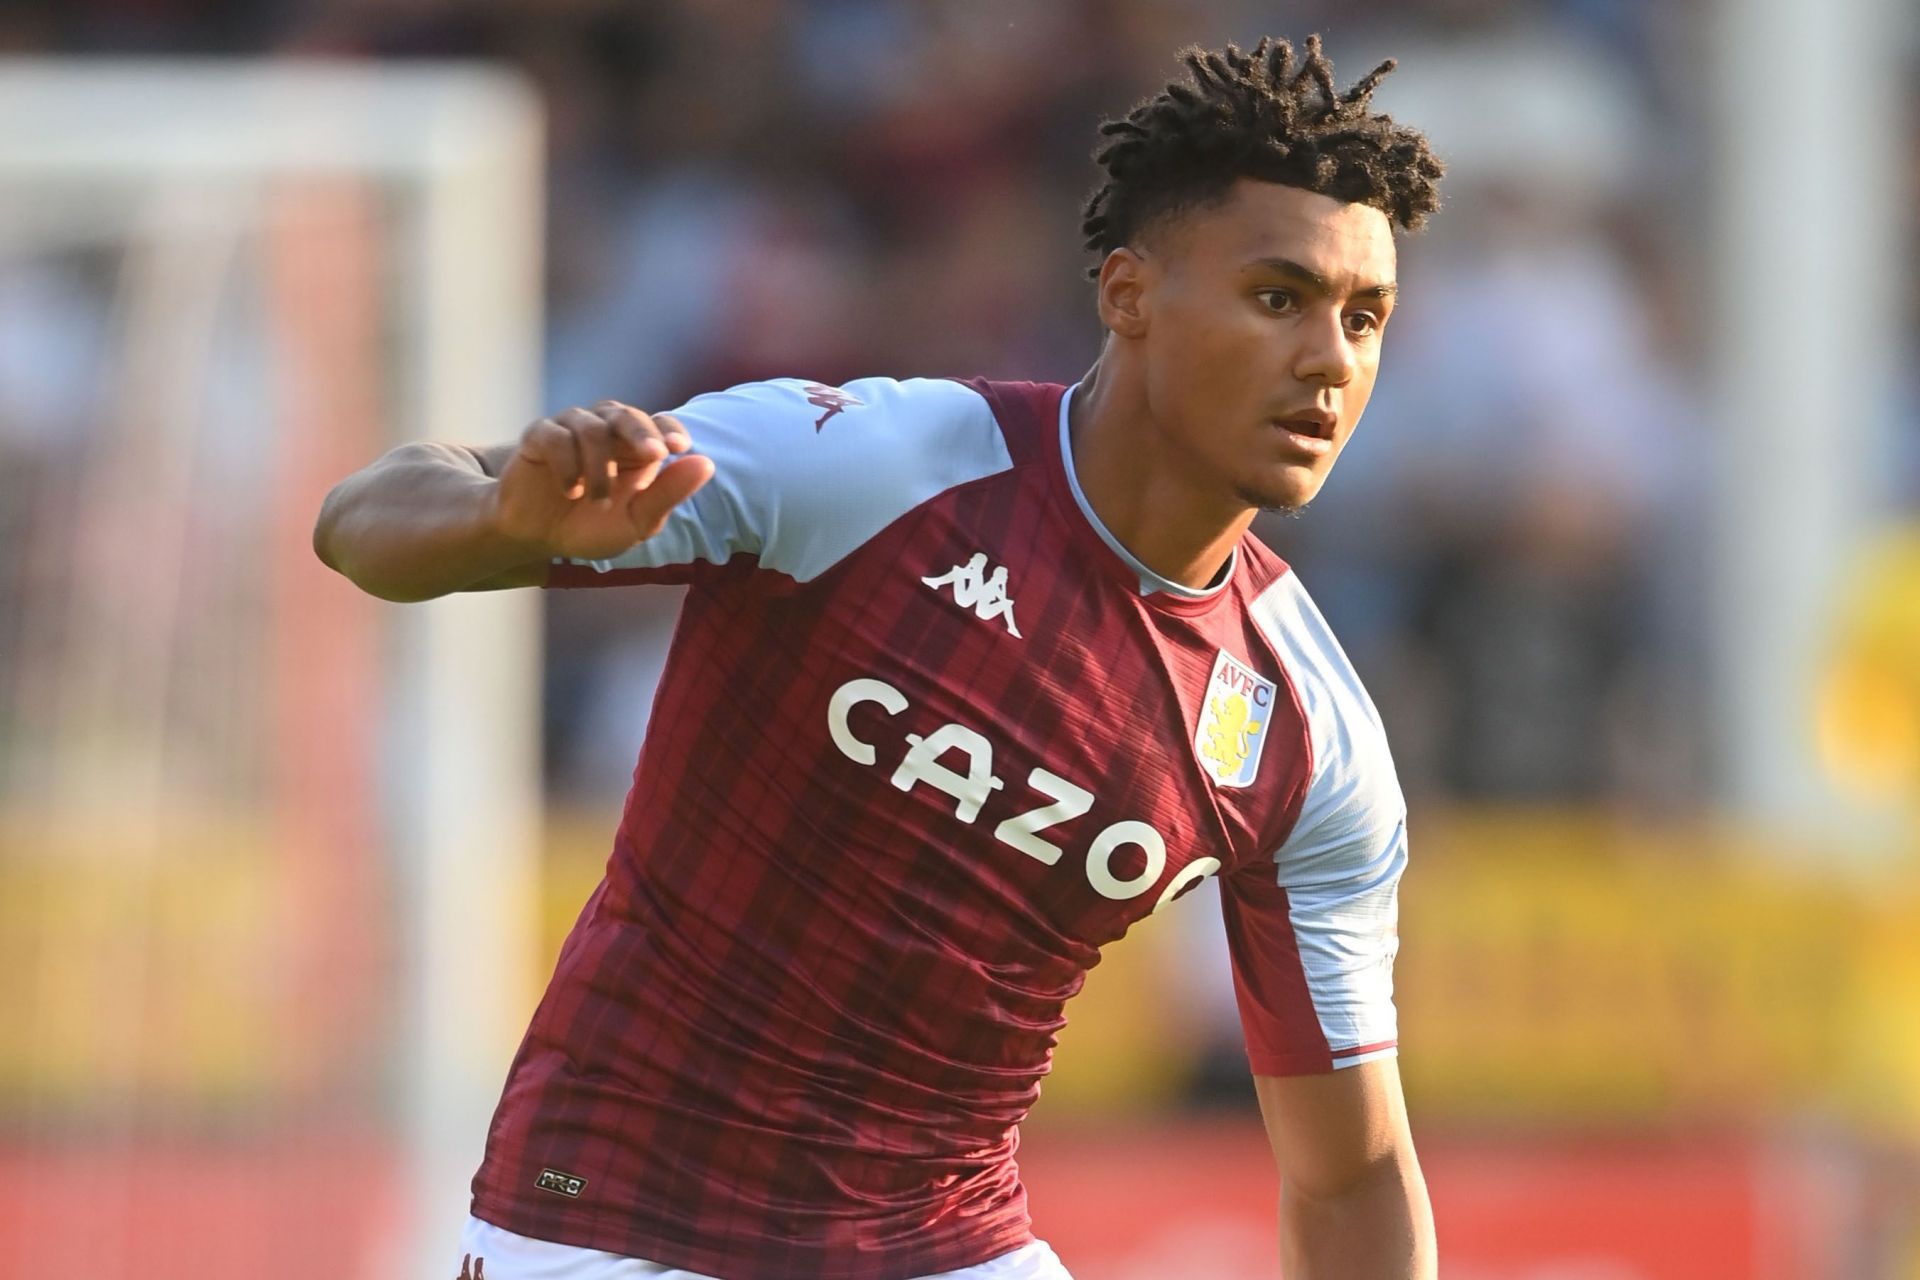 Could Ollie Watkins get some FPL points from this fixture against Southampton?